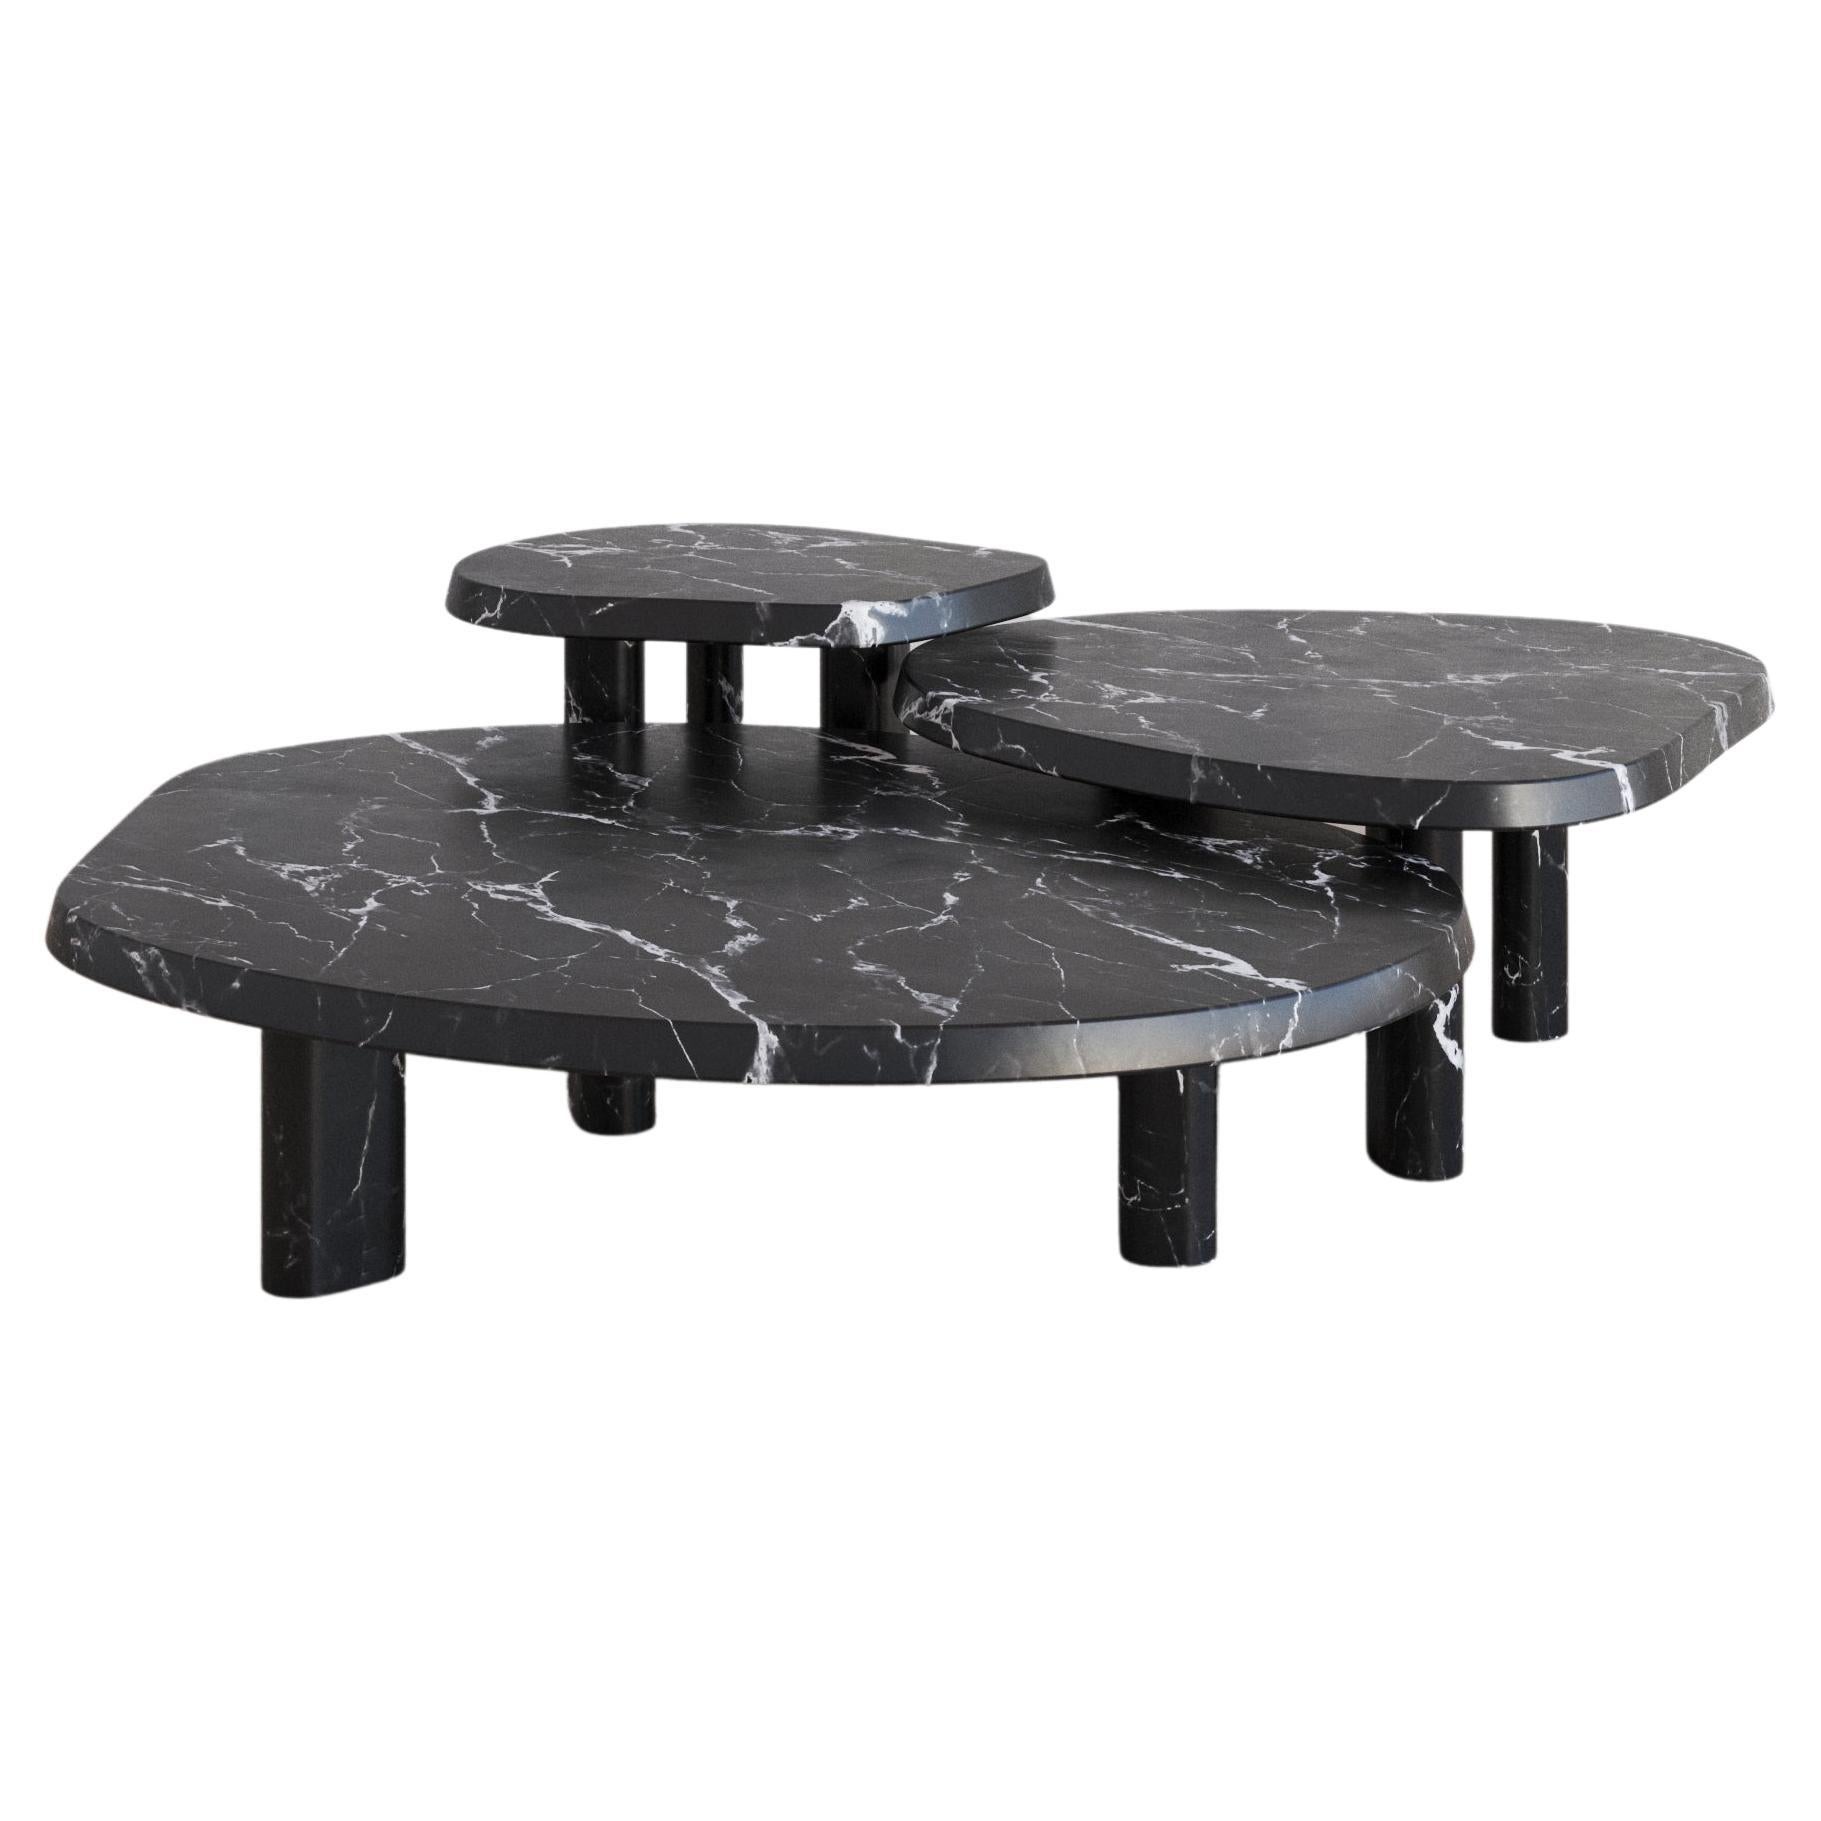 The Fiori Coffee Table in Silver Travertine by The Essentialist infers a delicate sense of organicism, a vision of sublime is born, revolutionising beauty and deifying stone in its truest expression. Fiori forges a perpetual statement of intuitive